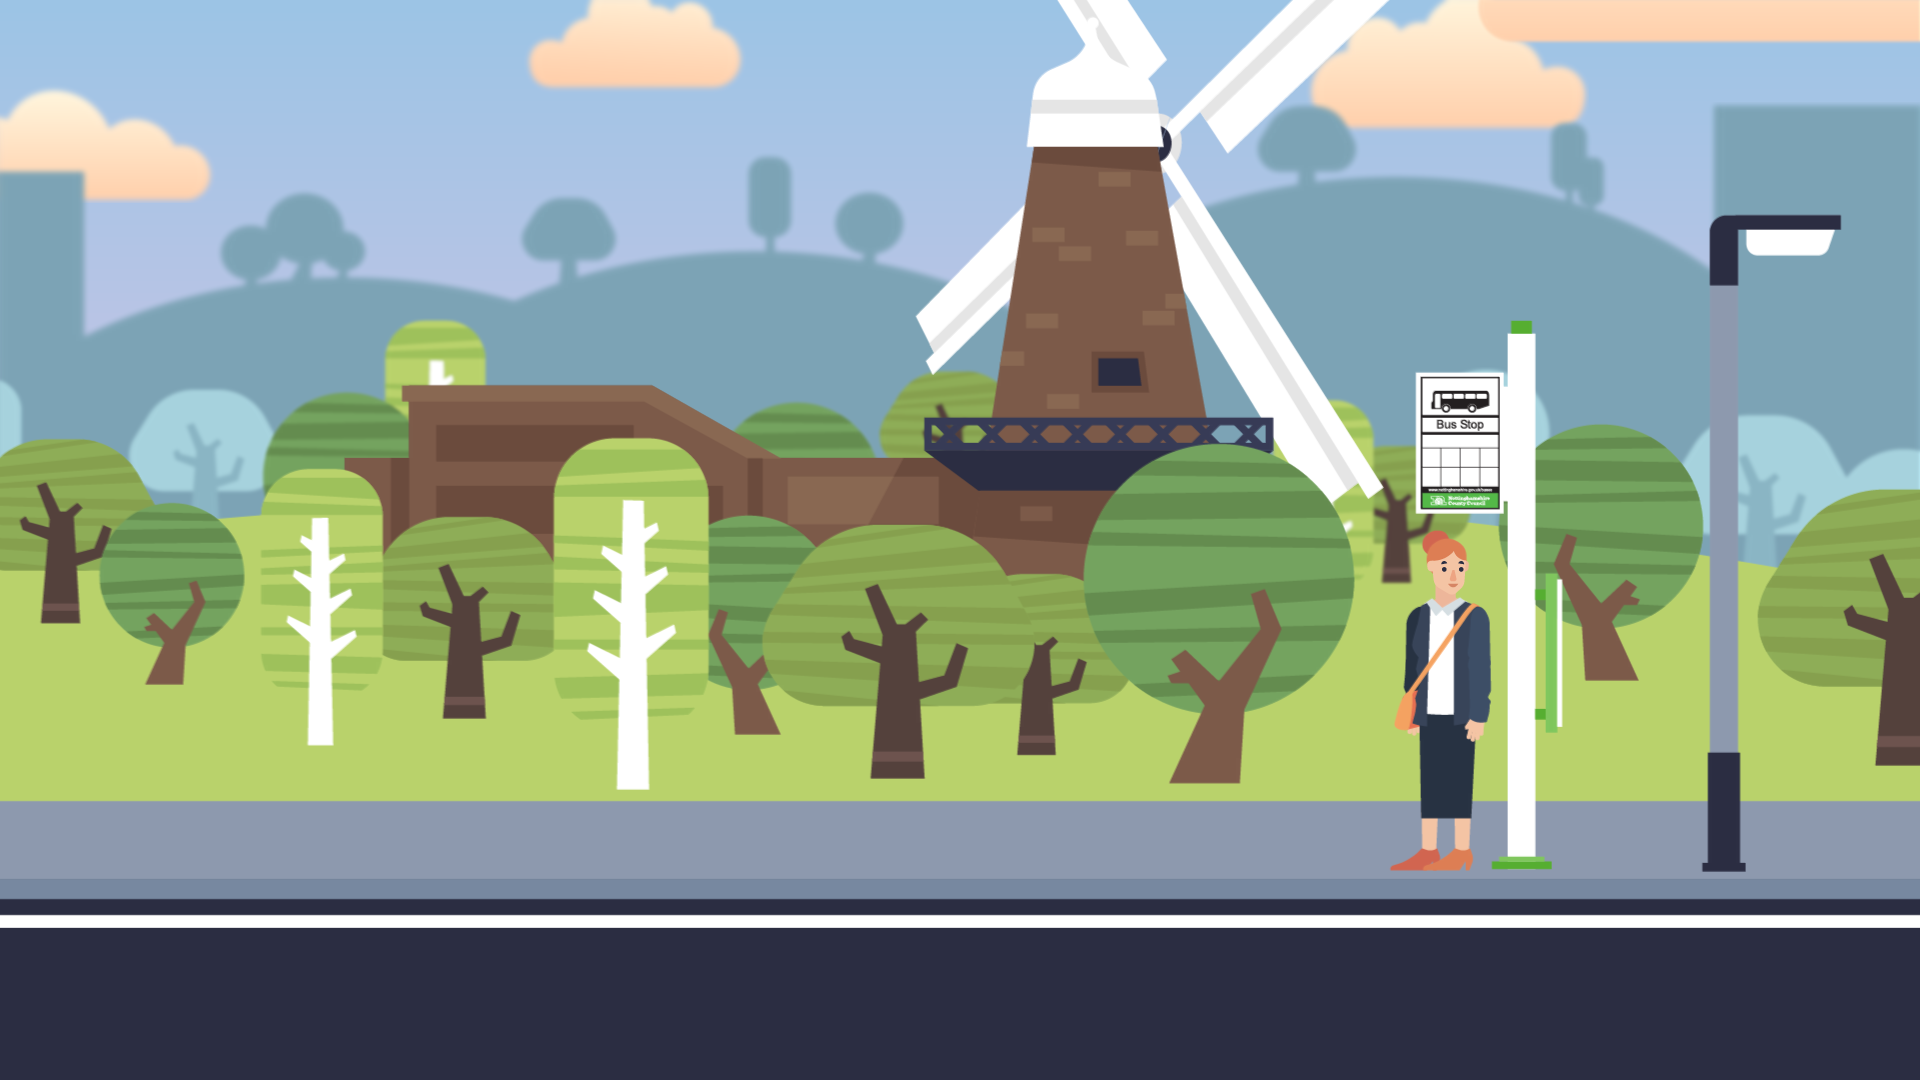 An illustration of a someone waiting at a bus stop with trees hills and a windmill behind them